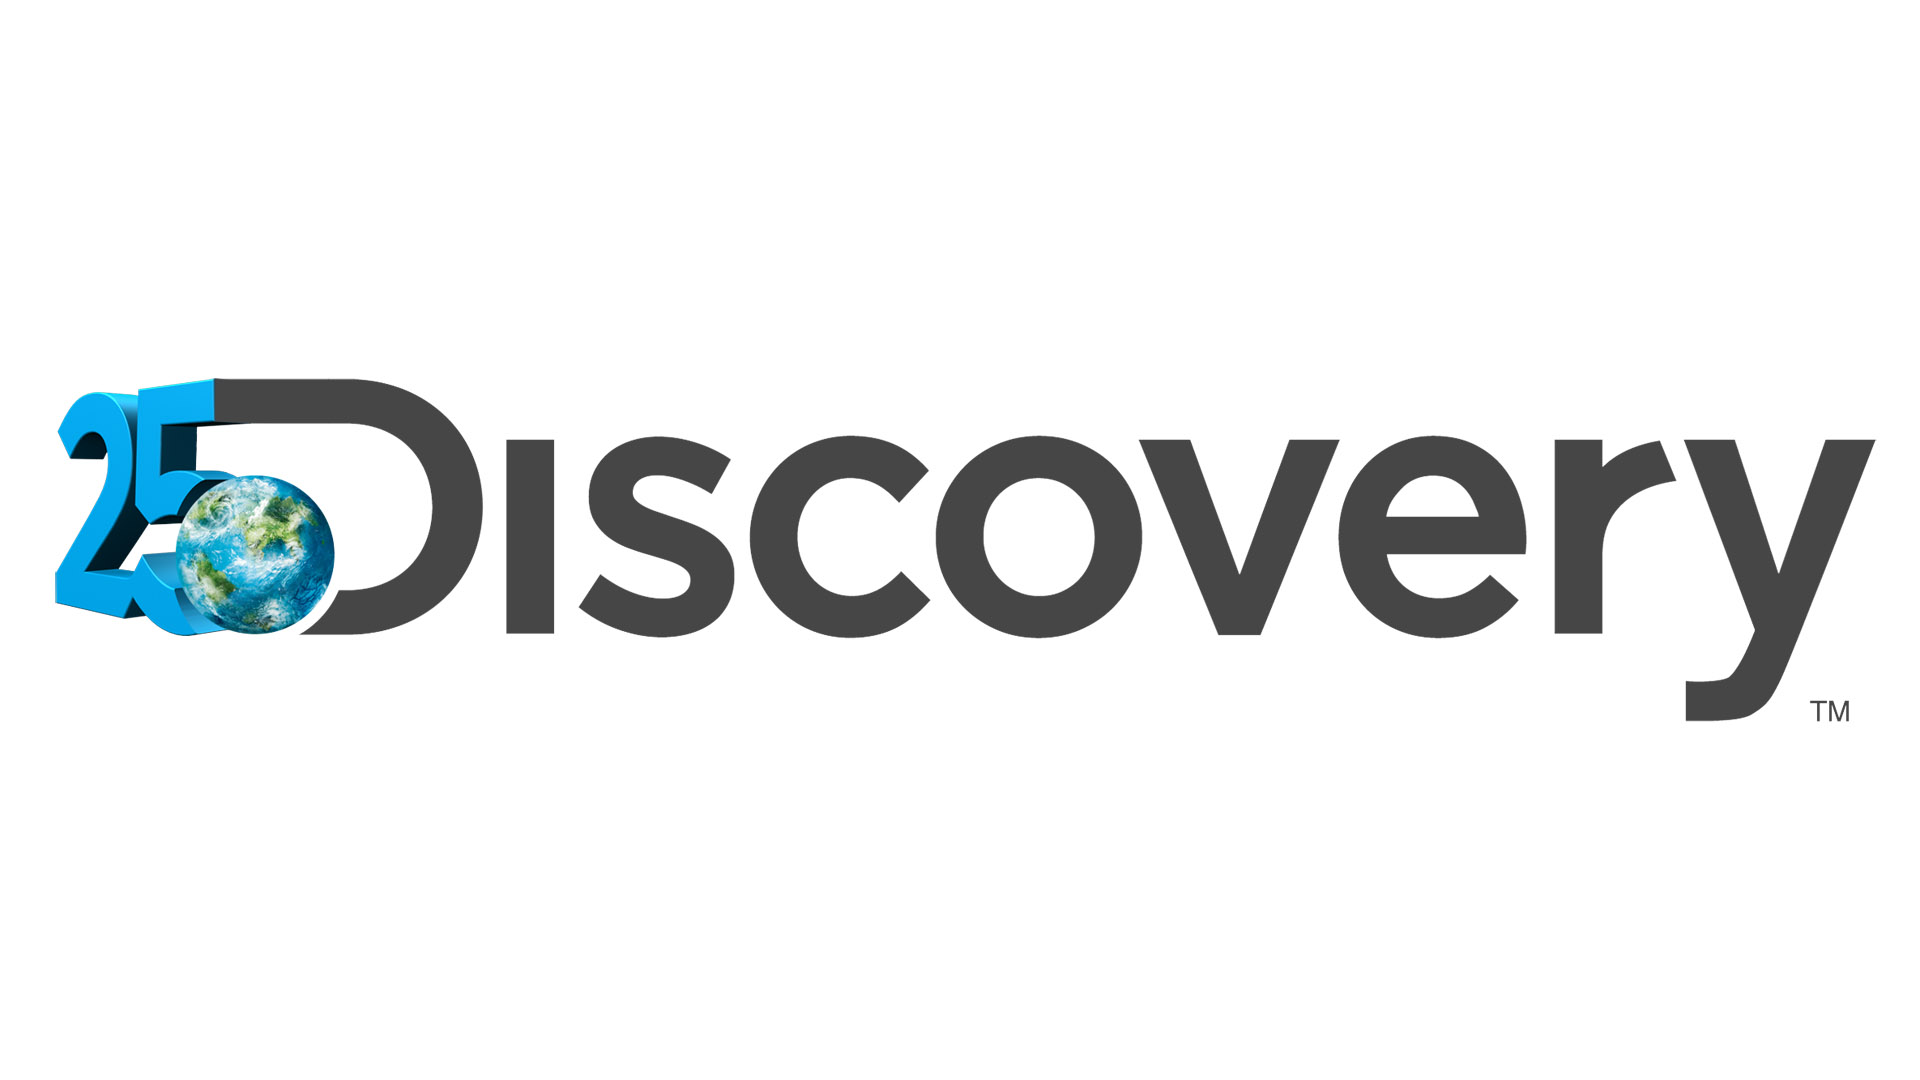 discovery go comactivate